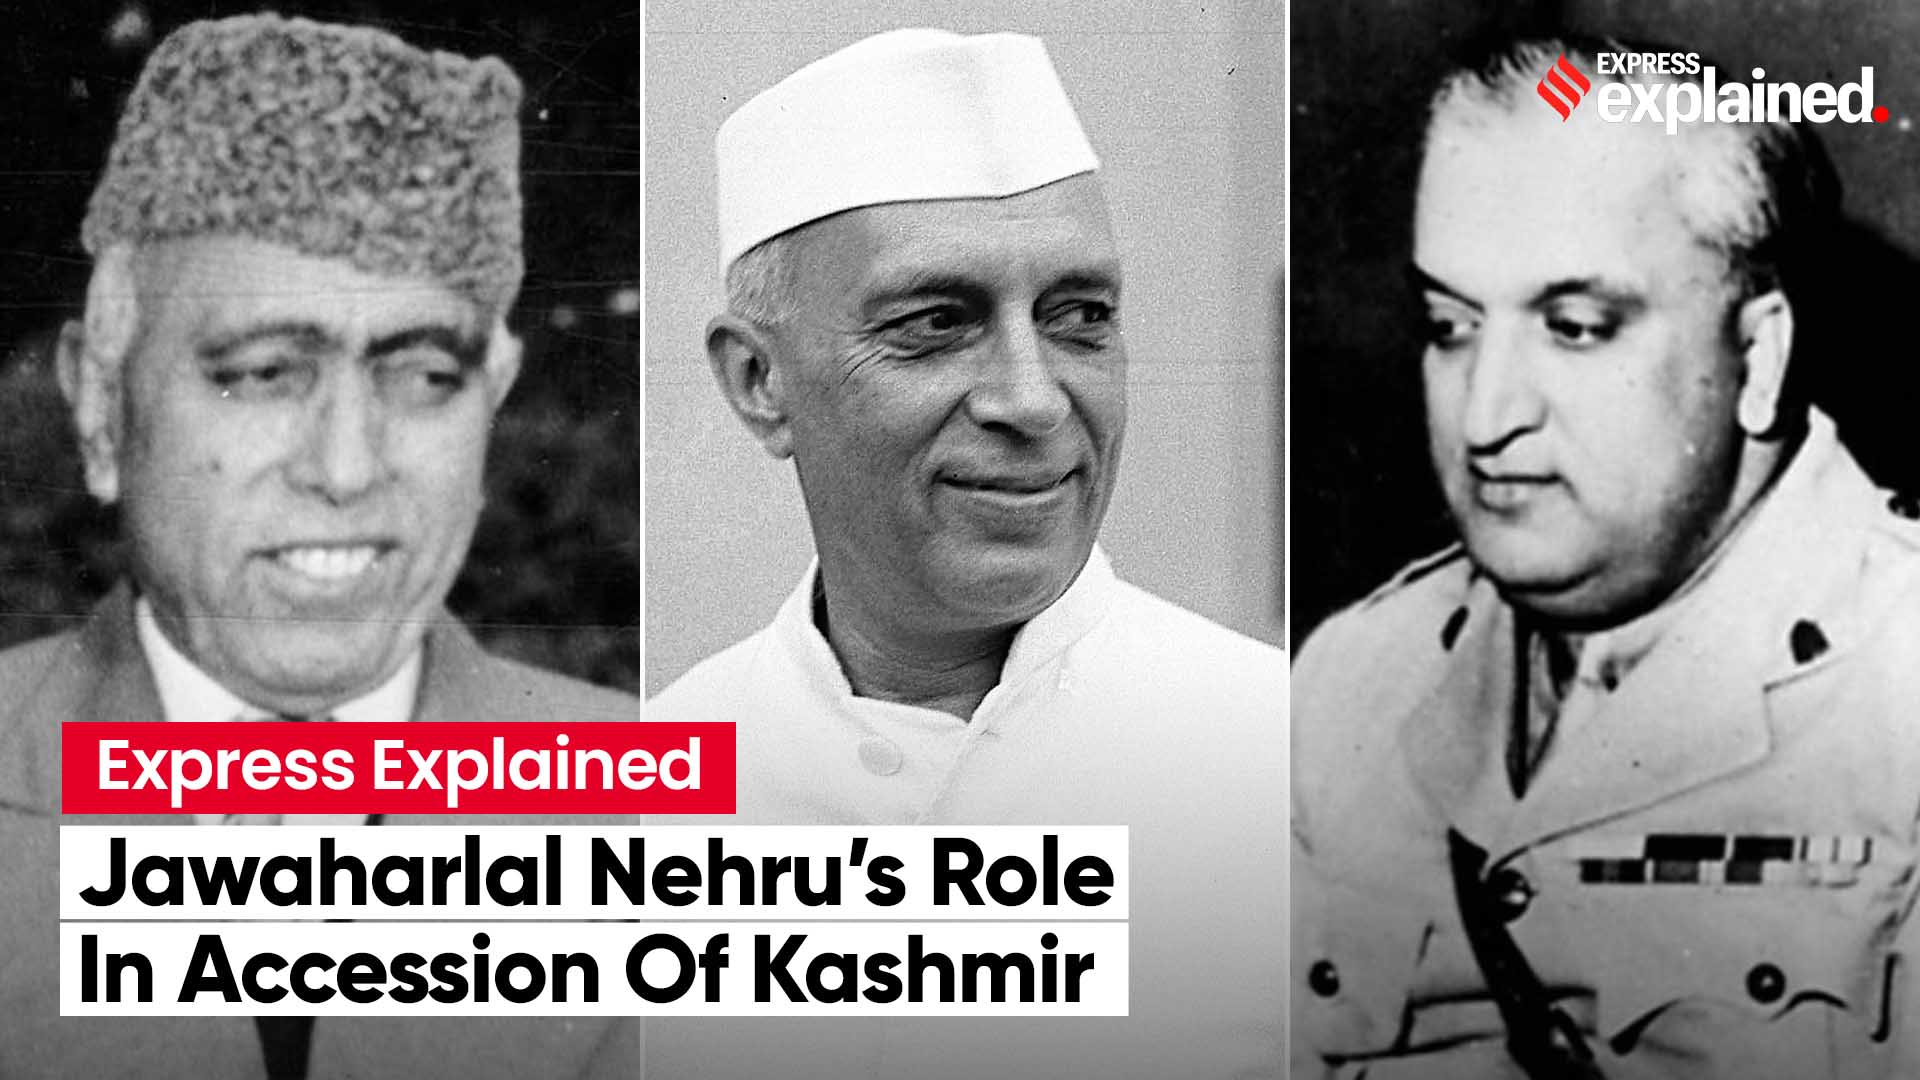 Express Explained What Role Did Jawaharlal Nehru Play In Accession Of Kashmir To India The 